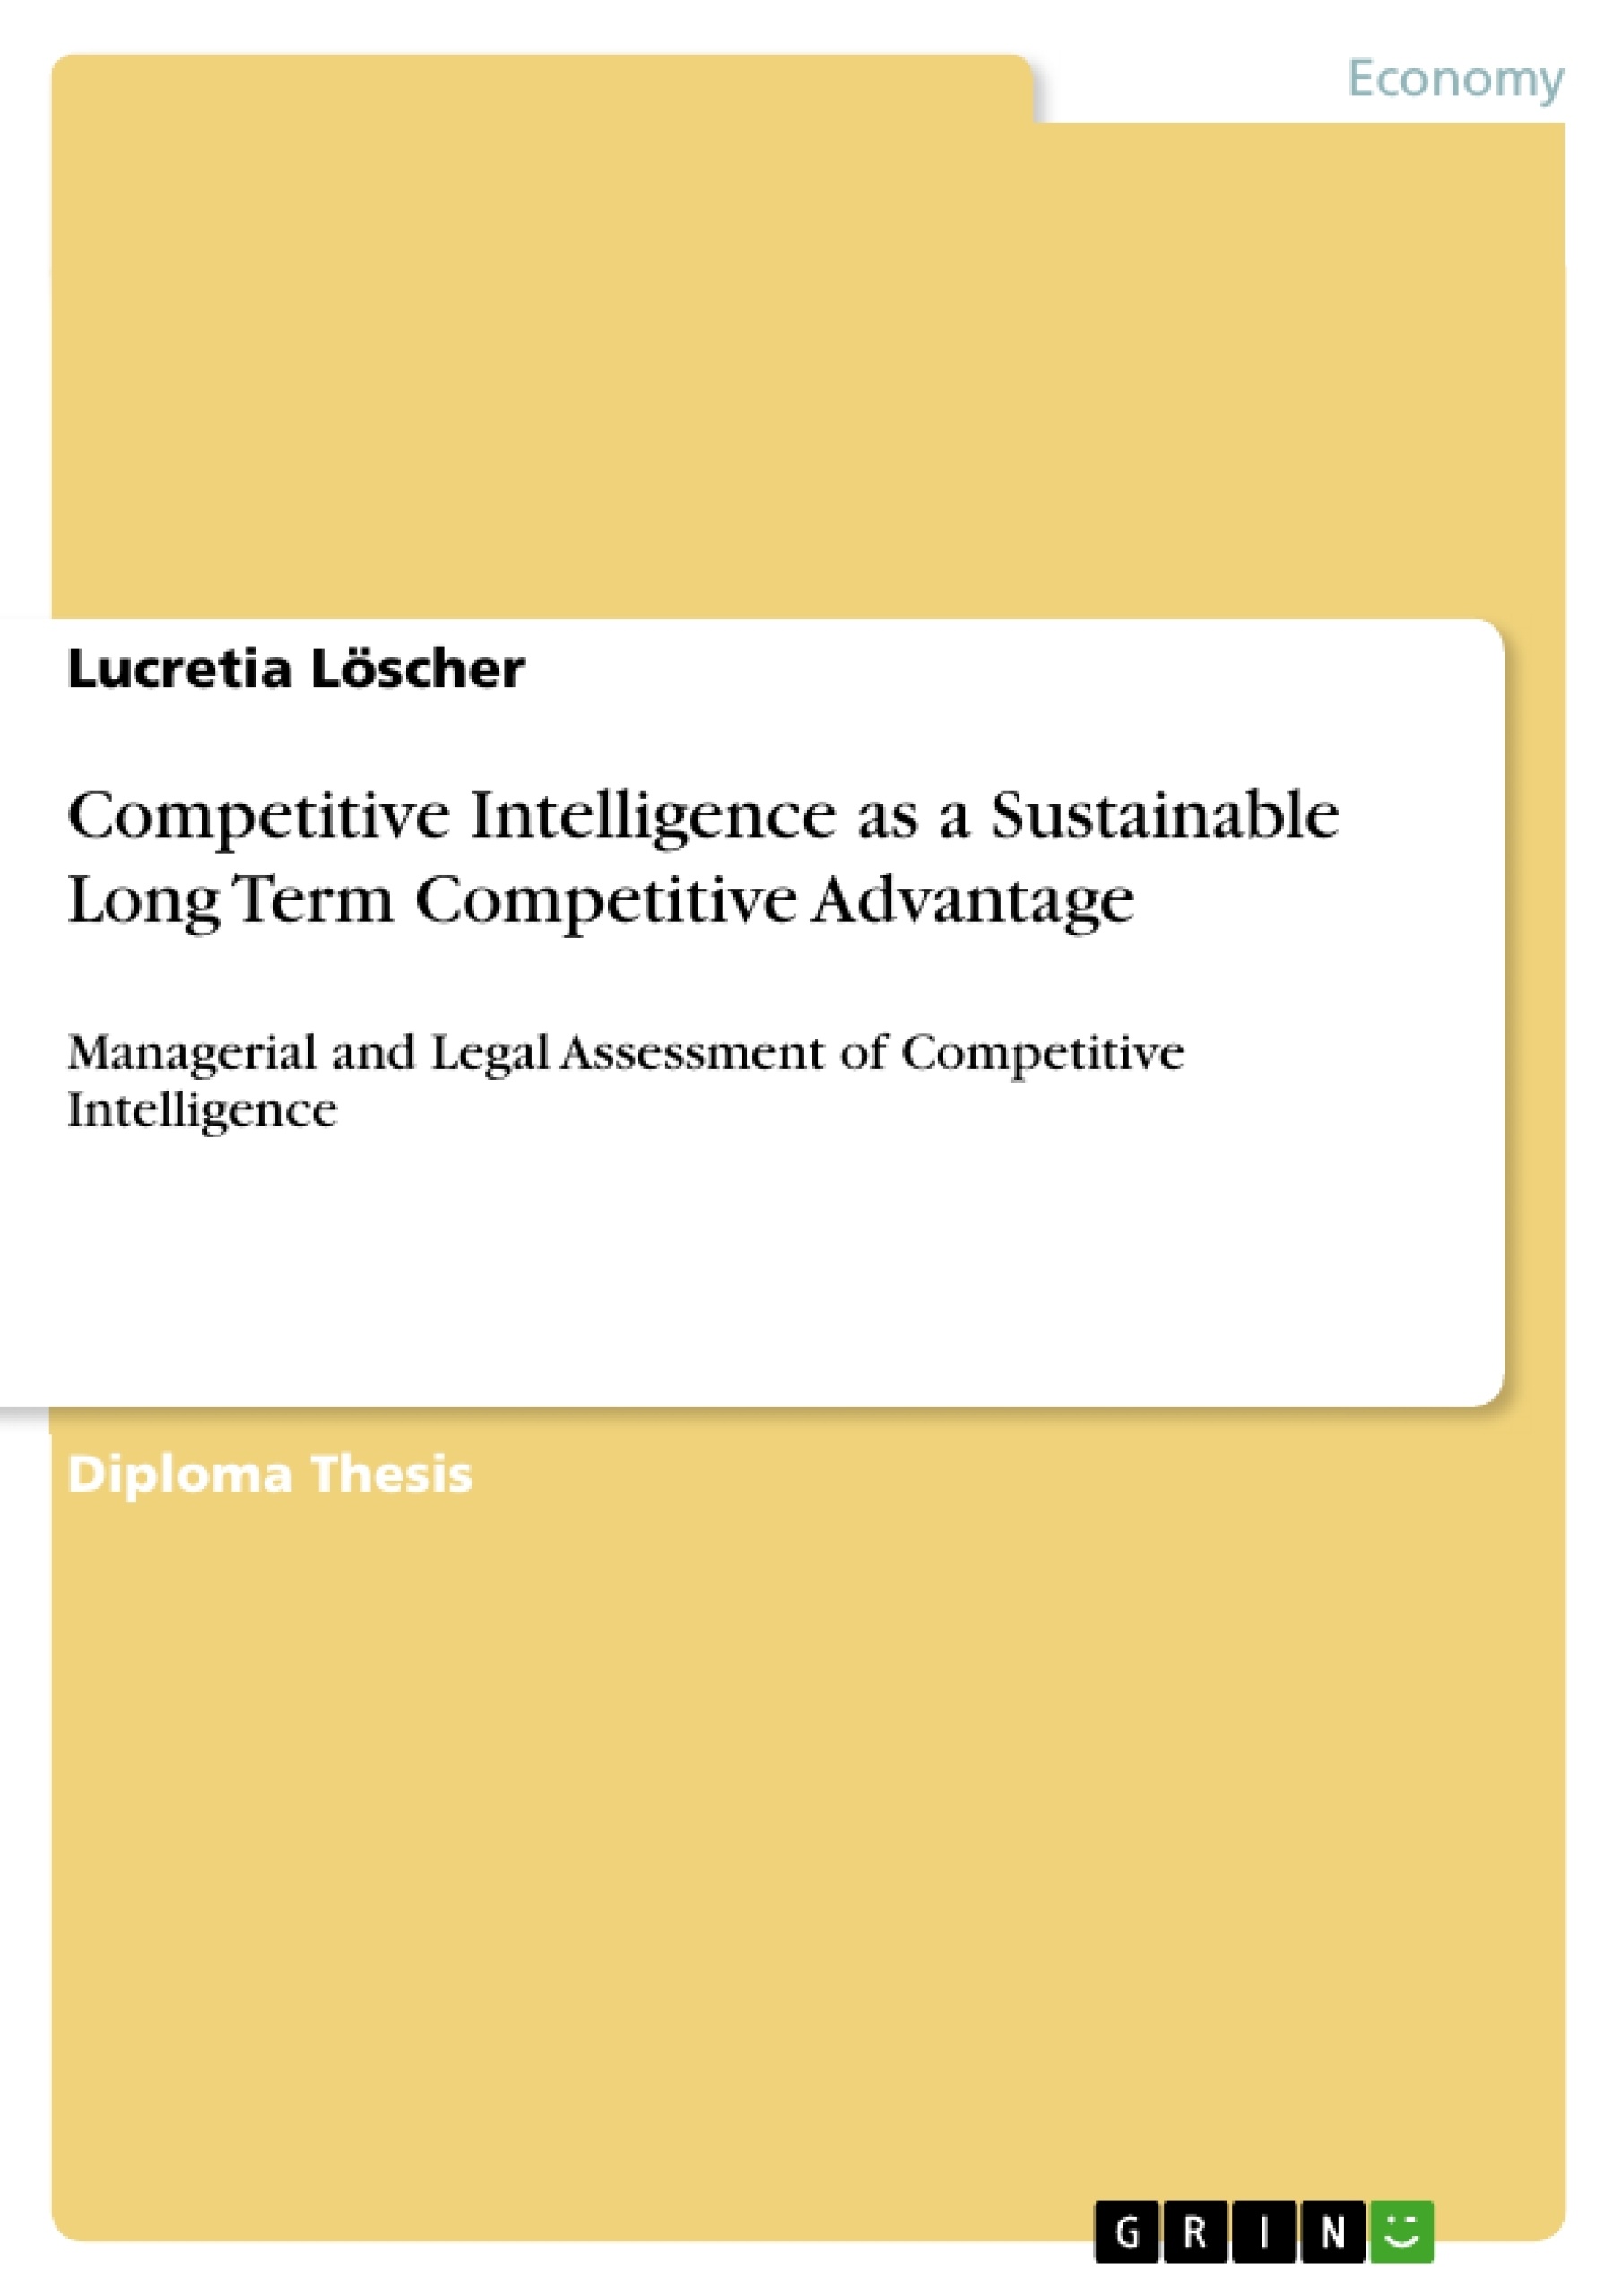 Title: Competitive Intelligence as a Sustainable Long Term Competitive Advantage